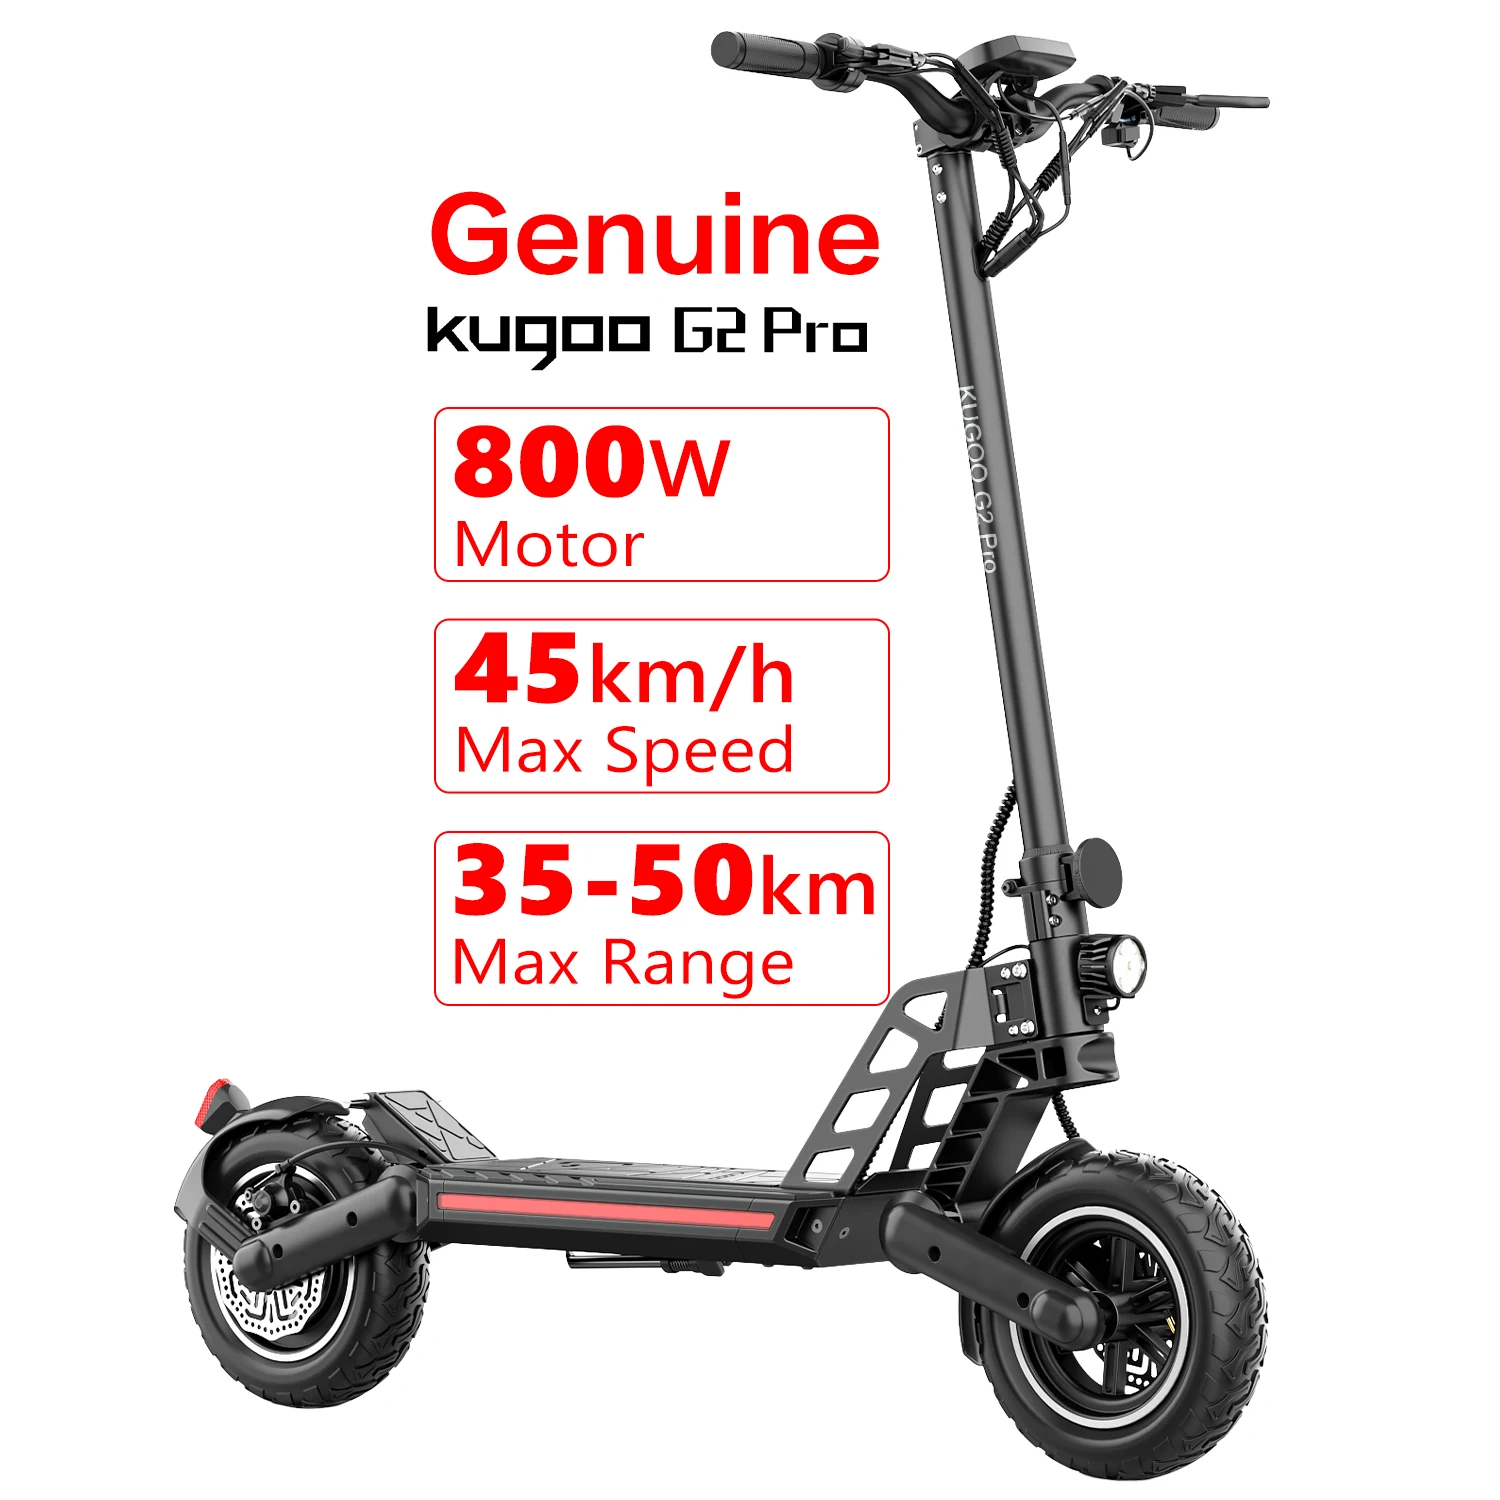 

UK EU Warehouse Dropshipping Genuine kugoo g2 pro 45km/h 800w off road adult 10 inch electric scooter pro scooter